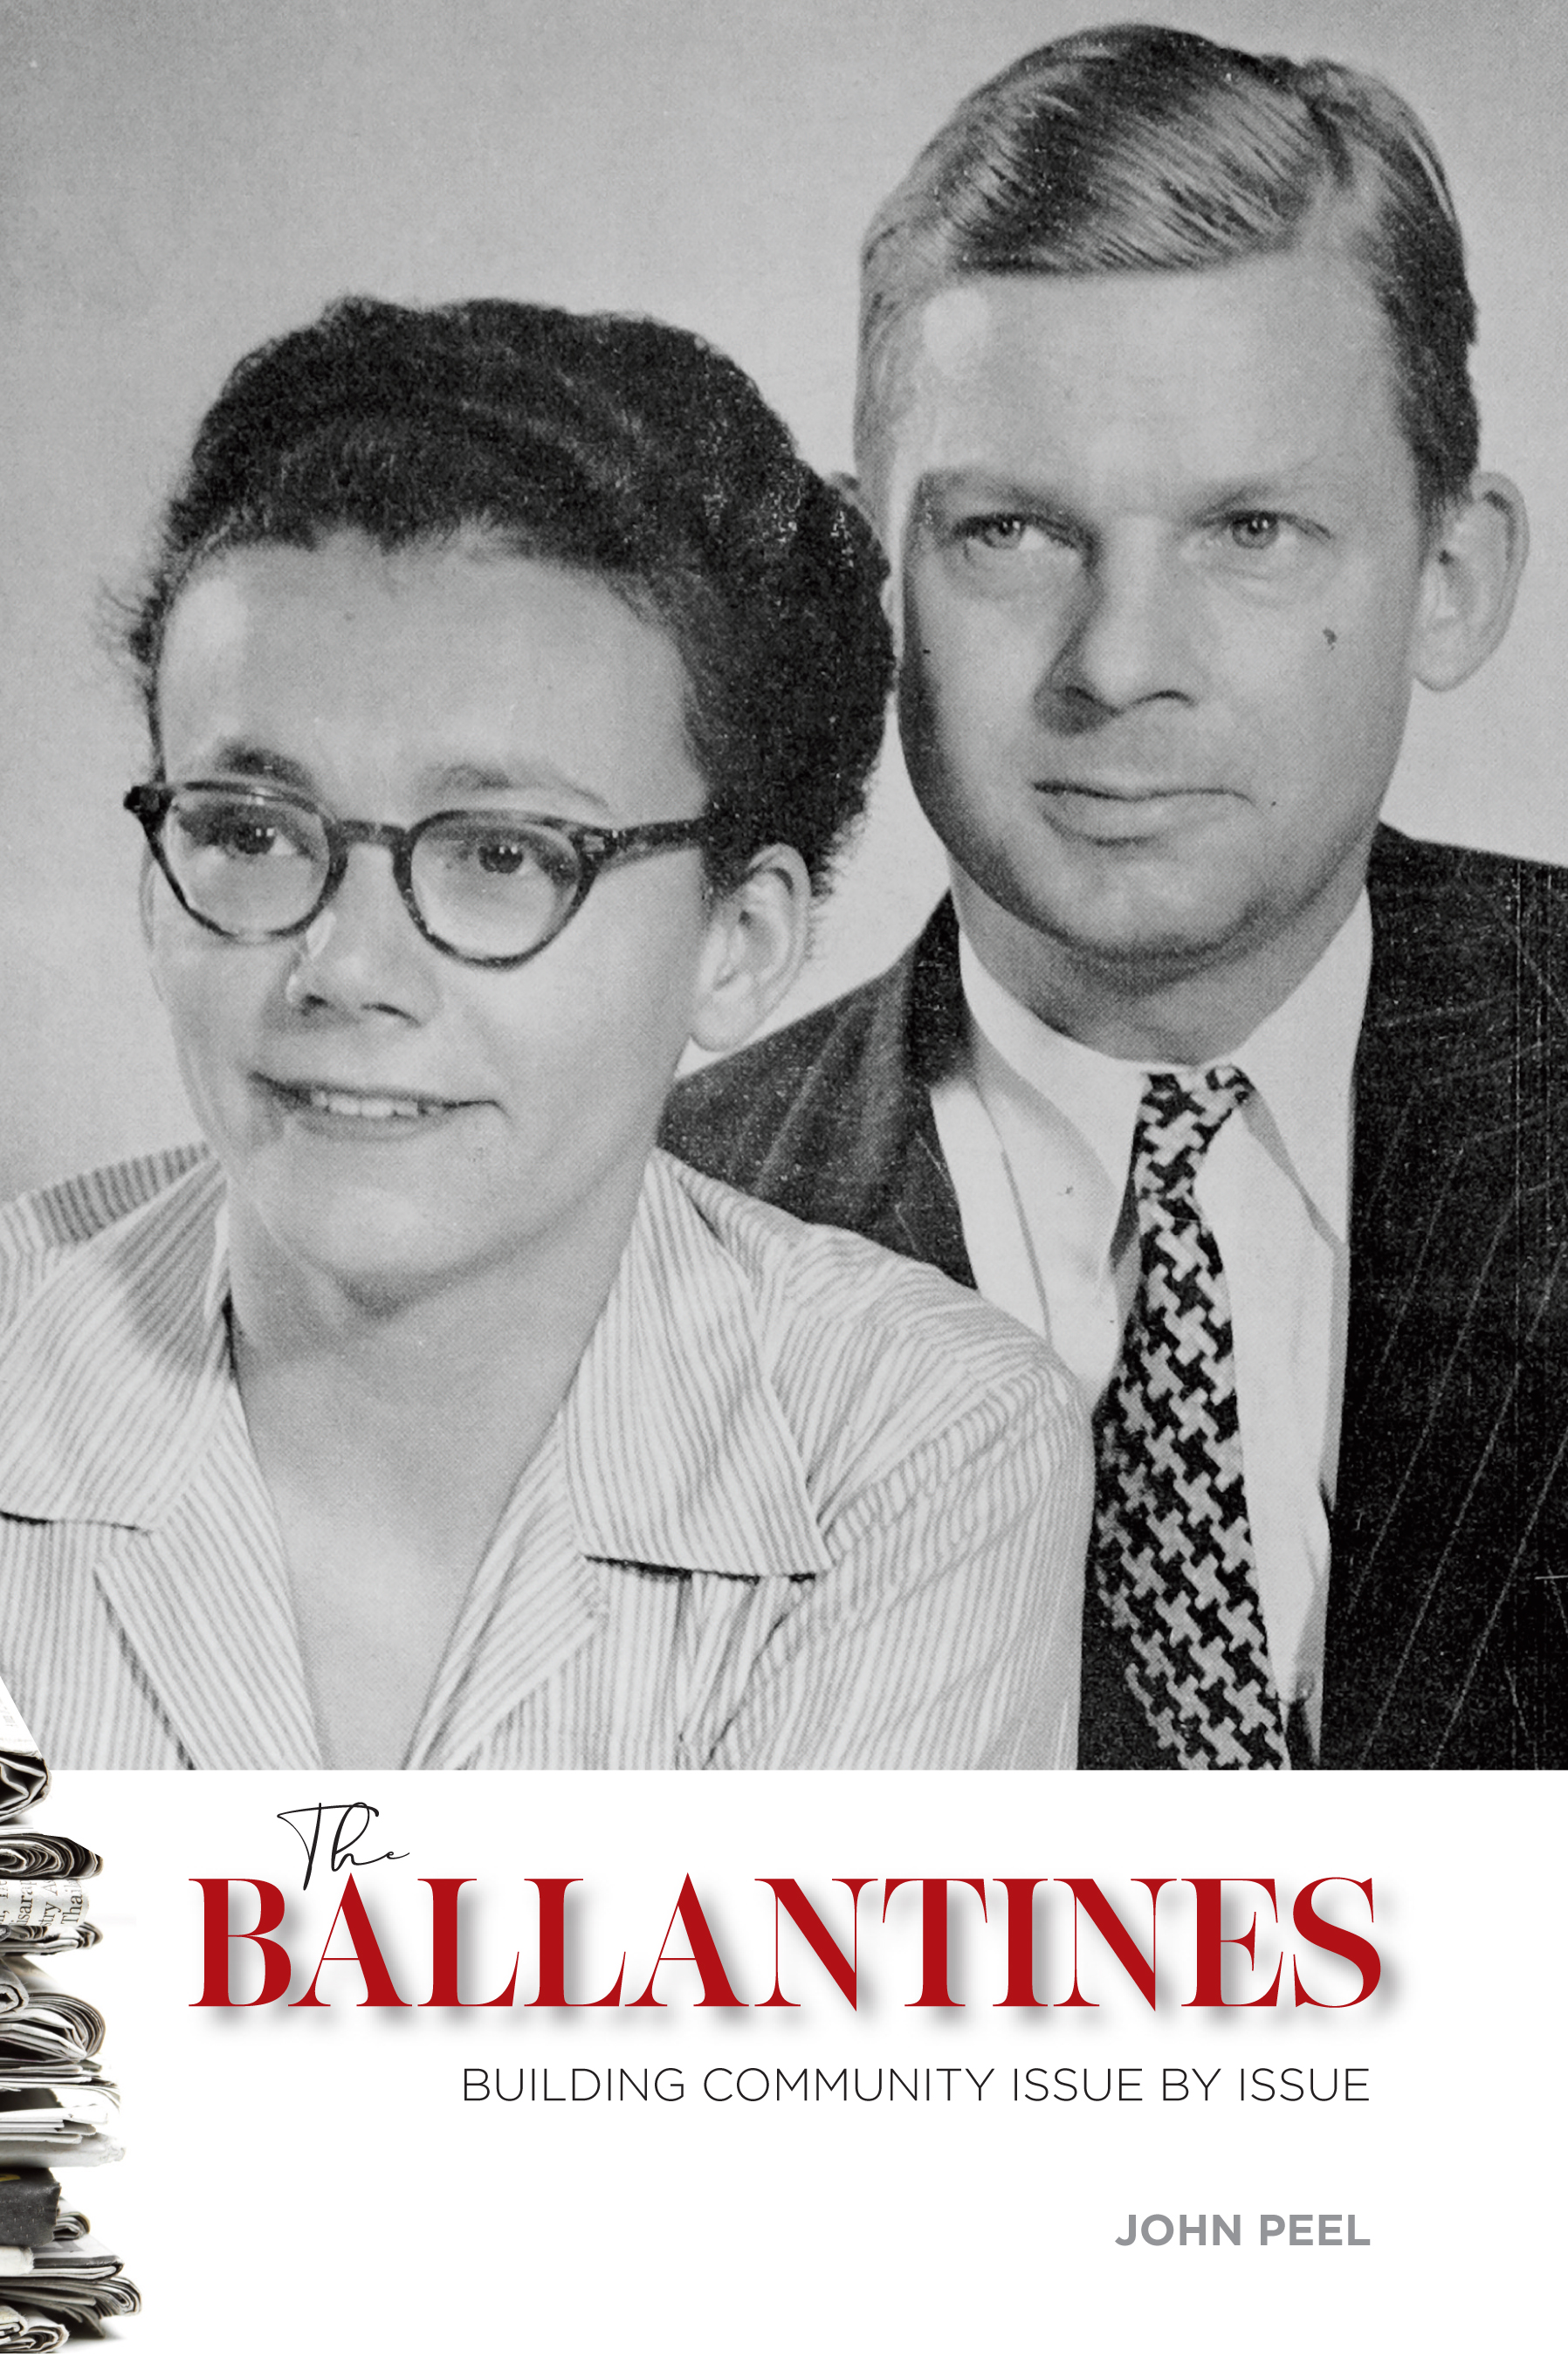 The Ballantines: Building Community Issue by Issue